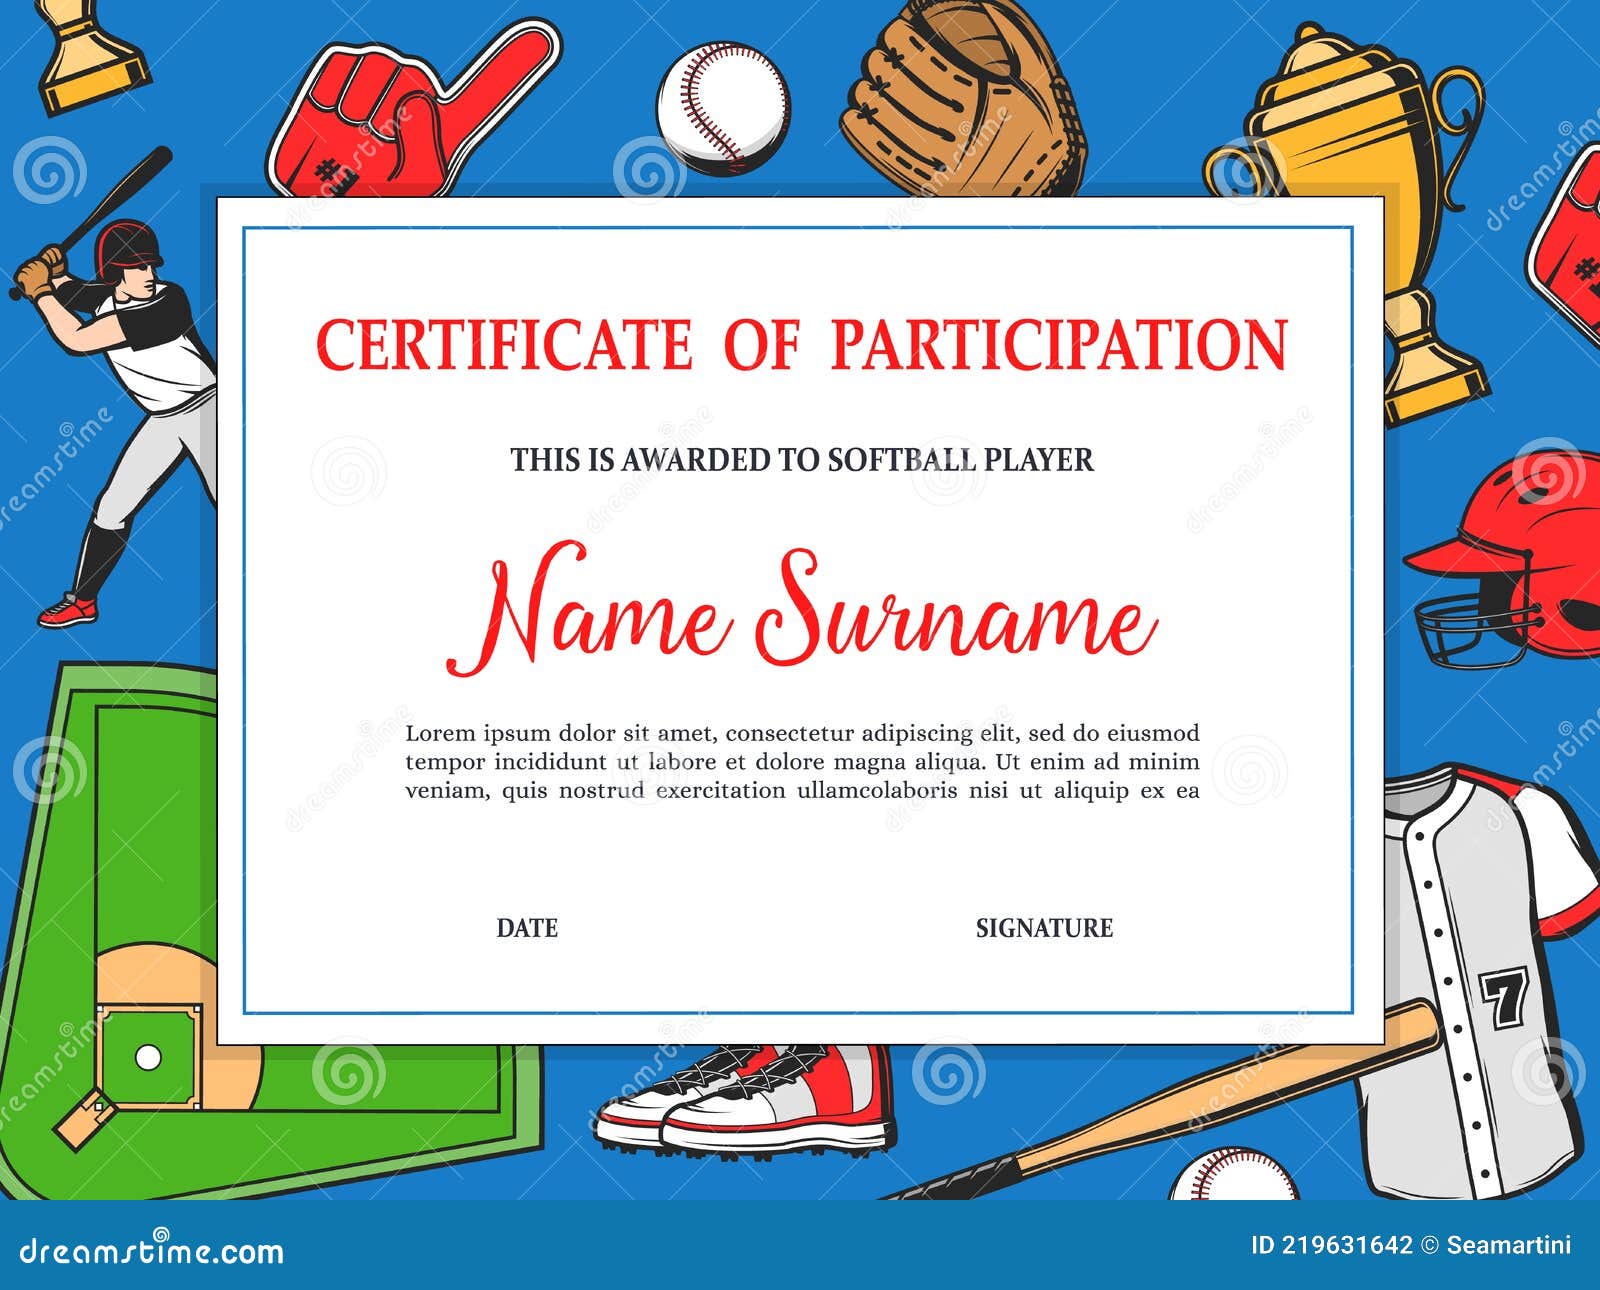 Softball Tournament Certificate of Participation Stock Vector In Free Softball Certificate Templates